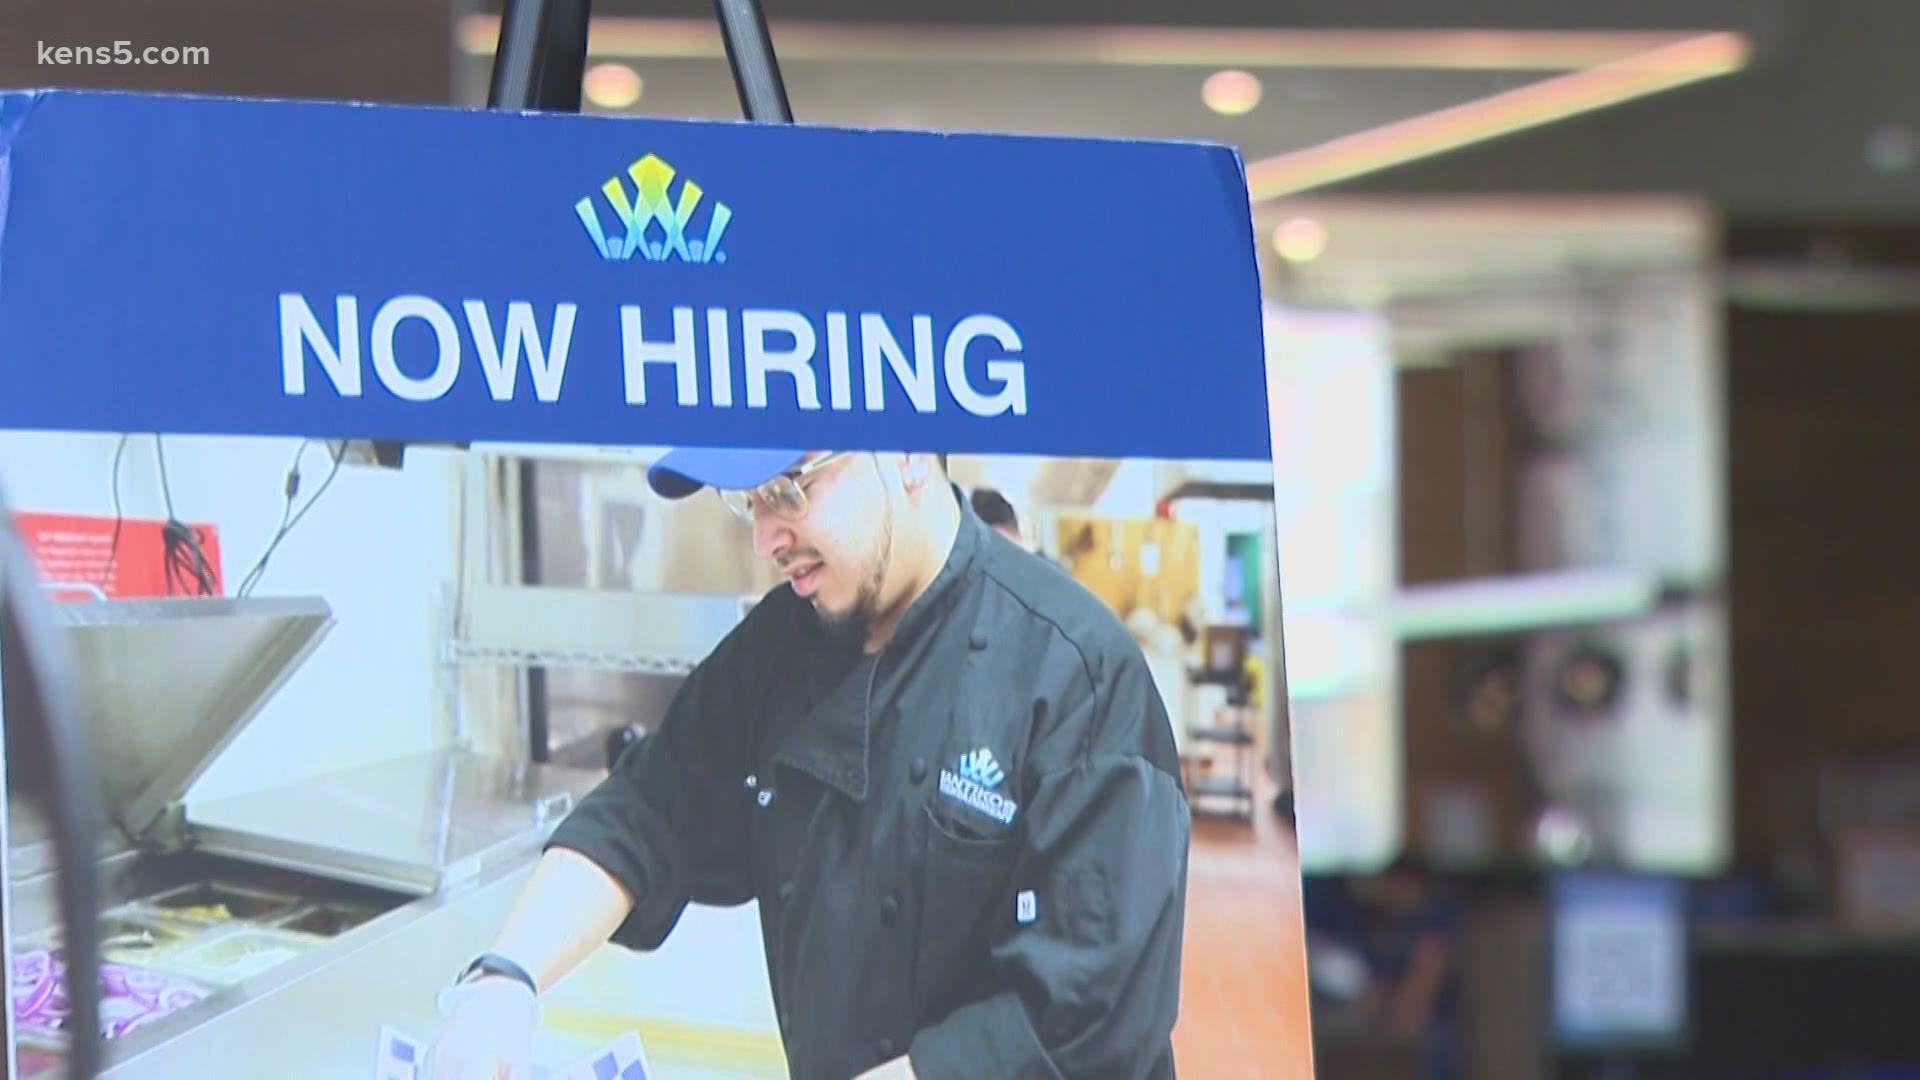 Workforce Solutions Alamo shows thousands of job openings across San Antonio. Here are several employers hiring now.